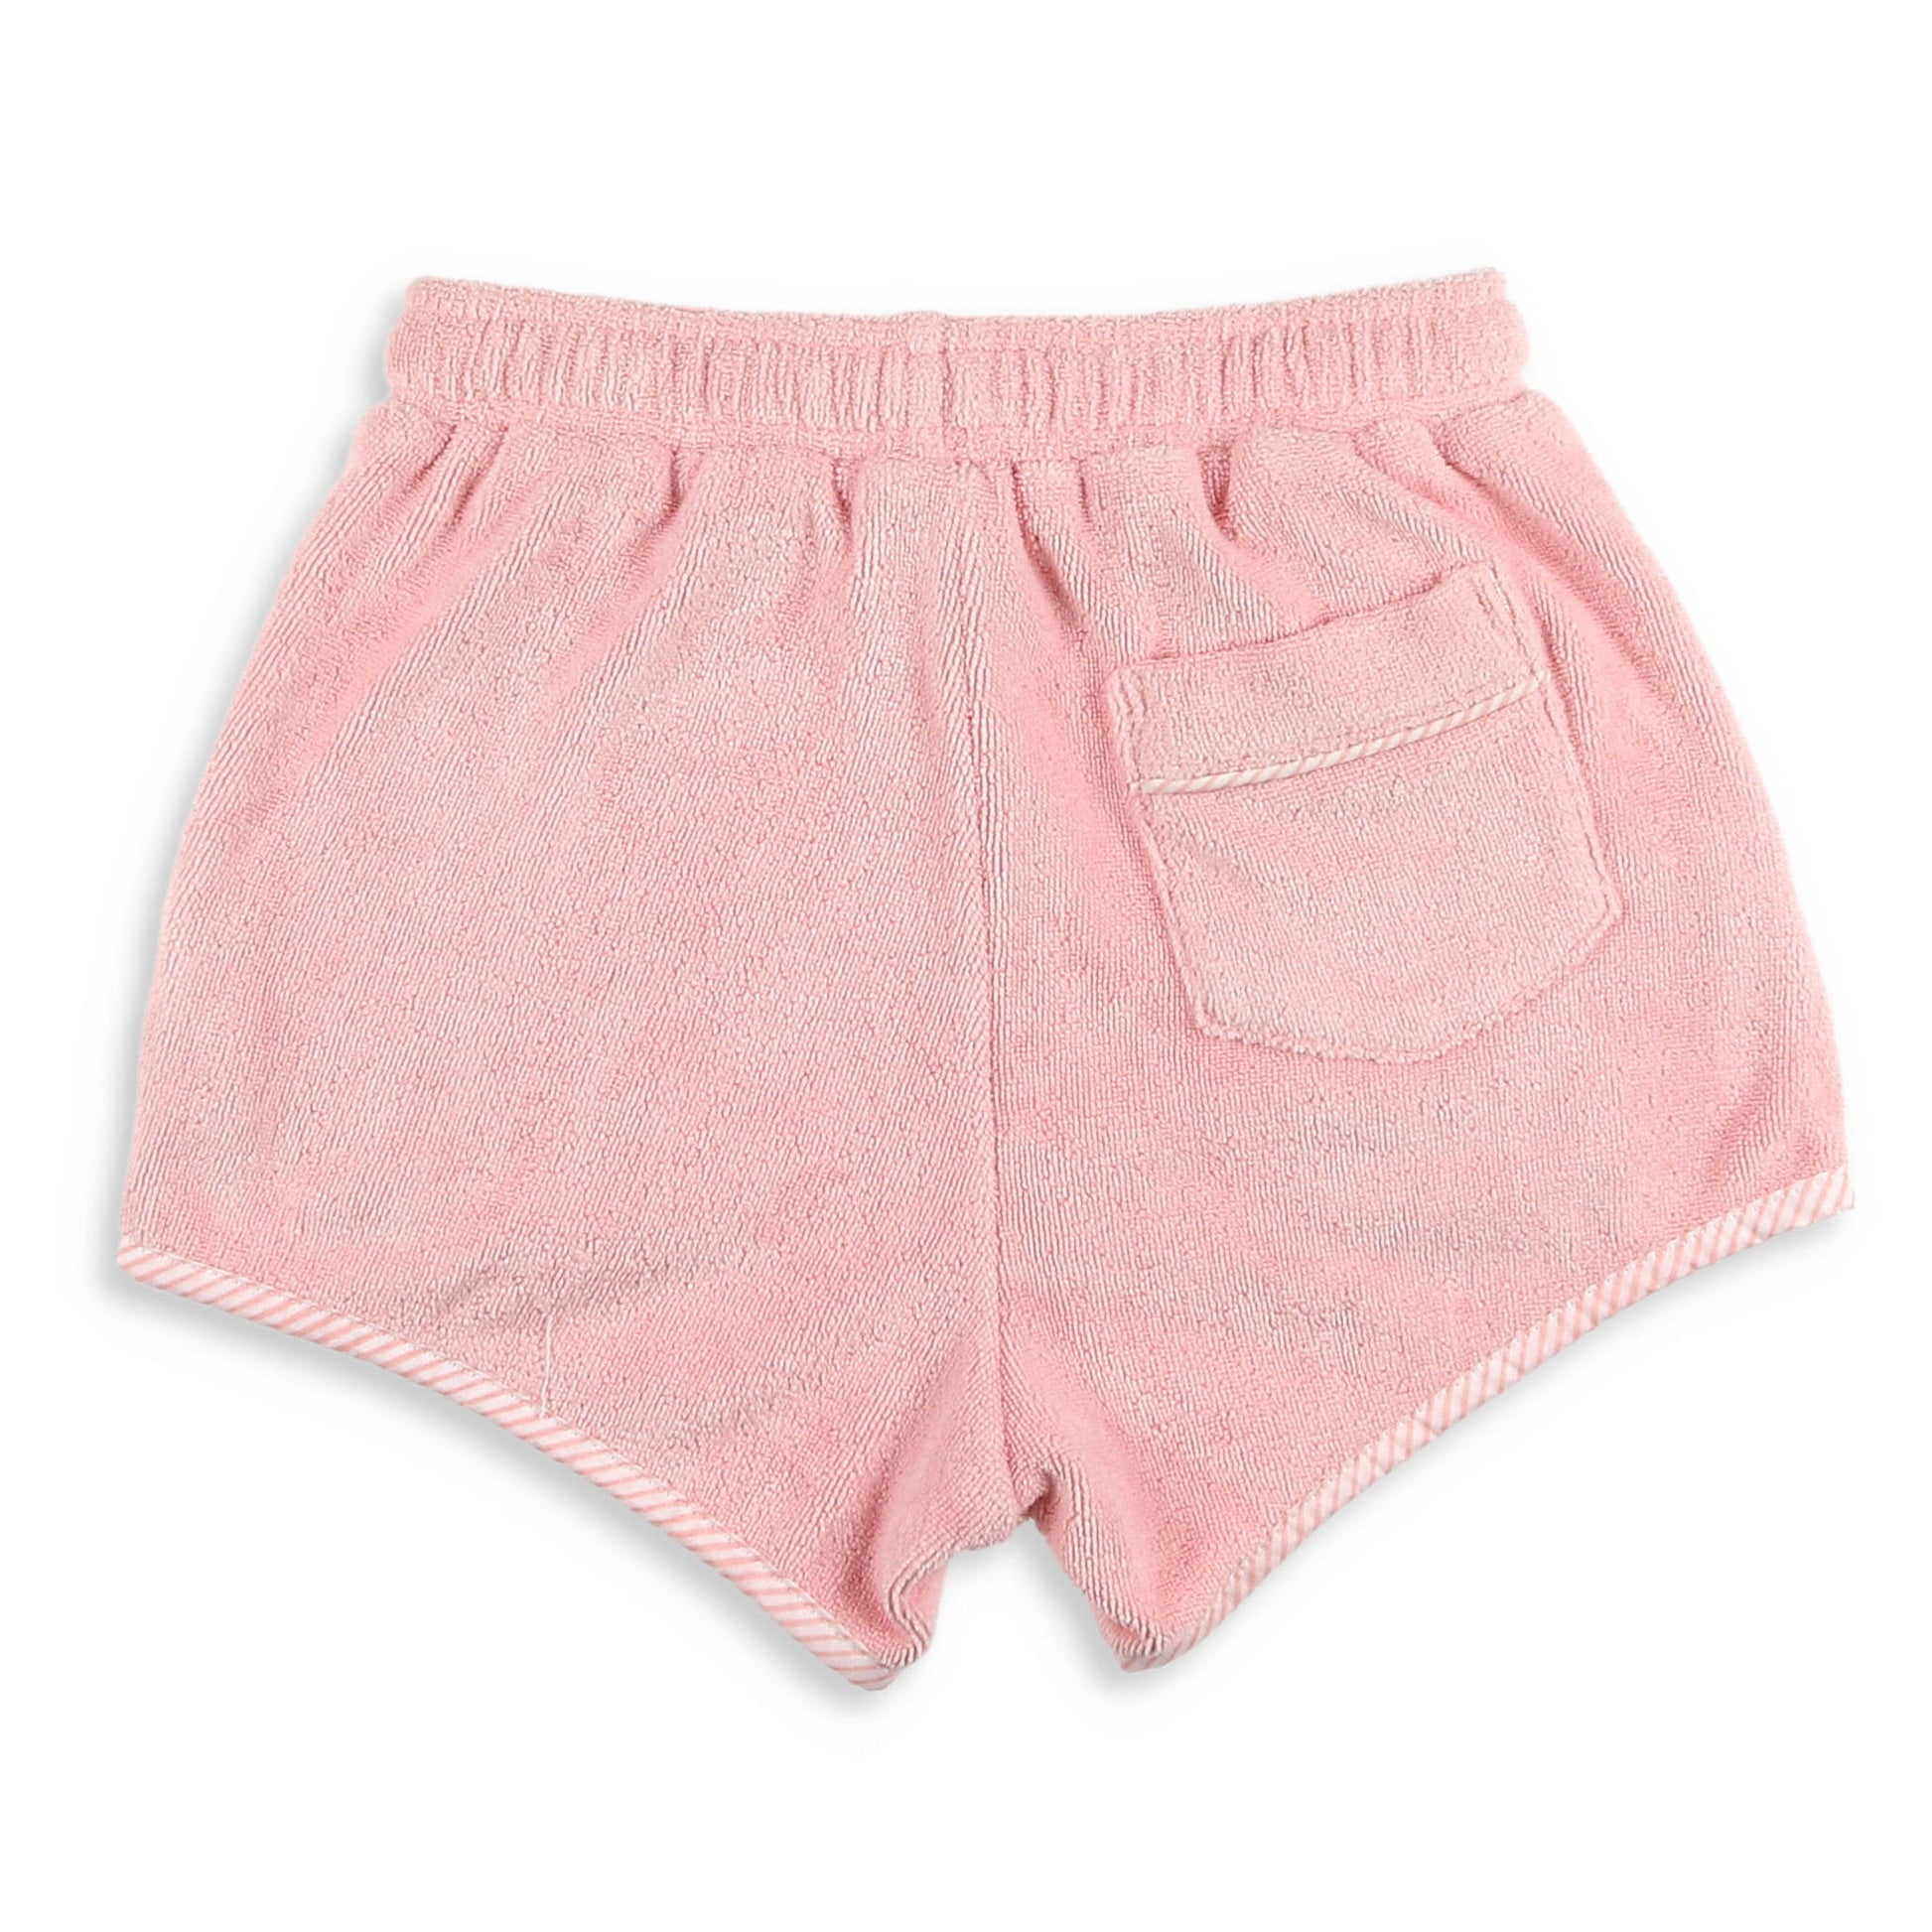 Girls Pink Terry Shorts - Shrimp and Grits Kids